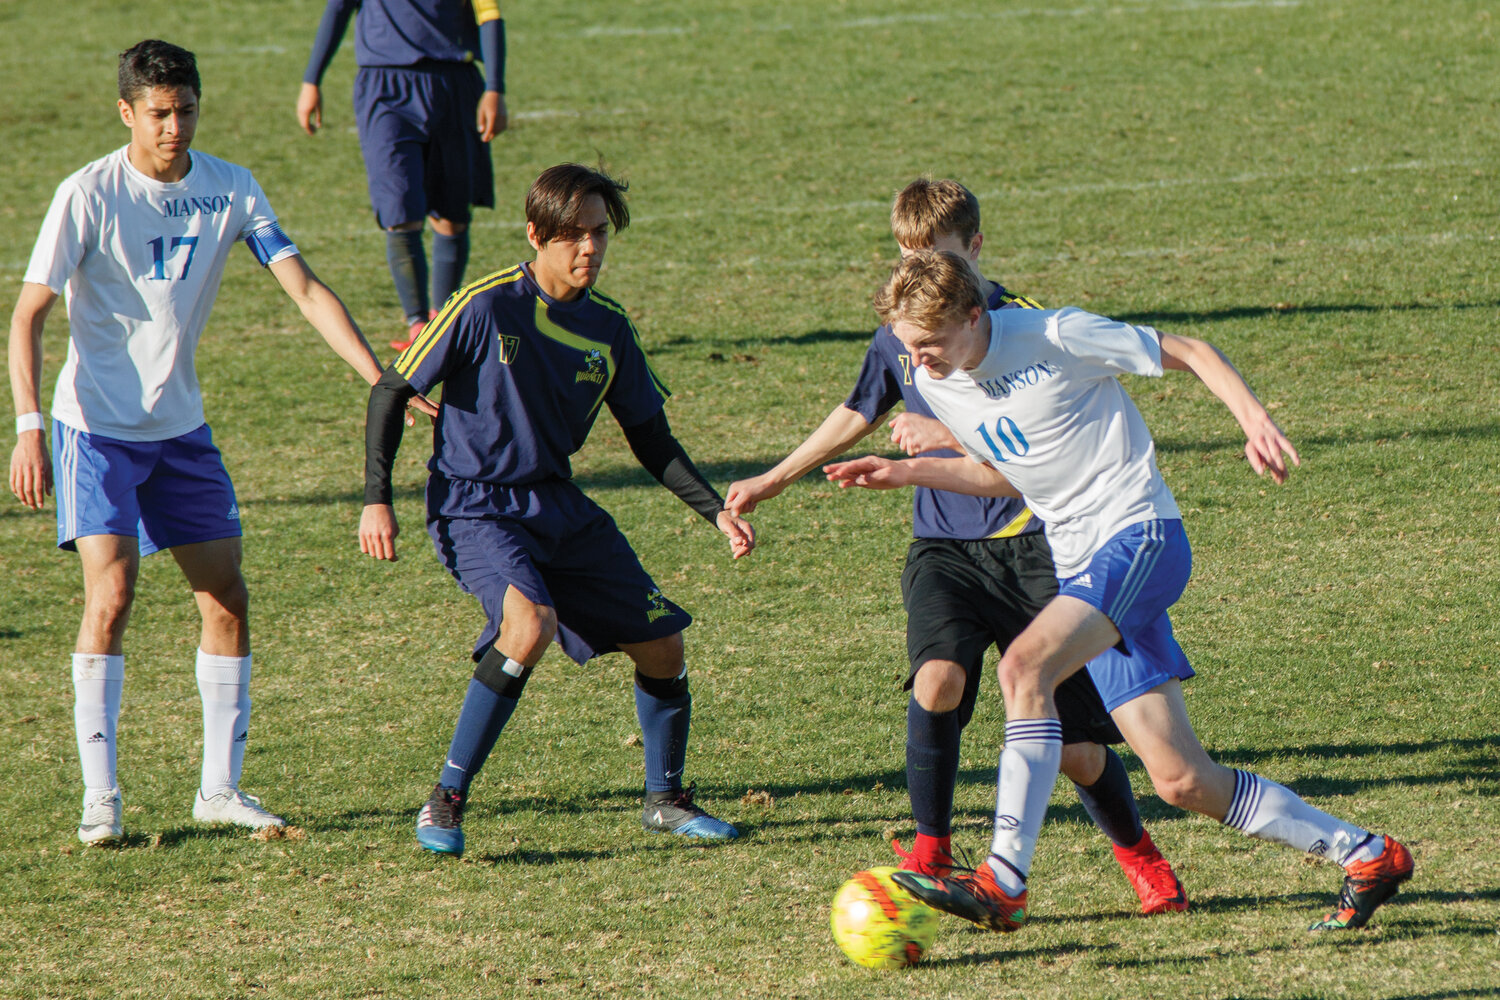 Oliver Ellingson (front right) battles to keep possession of the ball, with Team Captain Eduardo Escalera (far left) assisting.